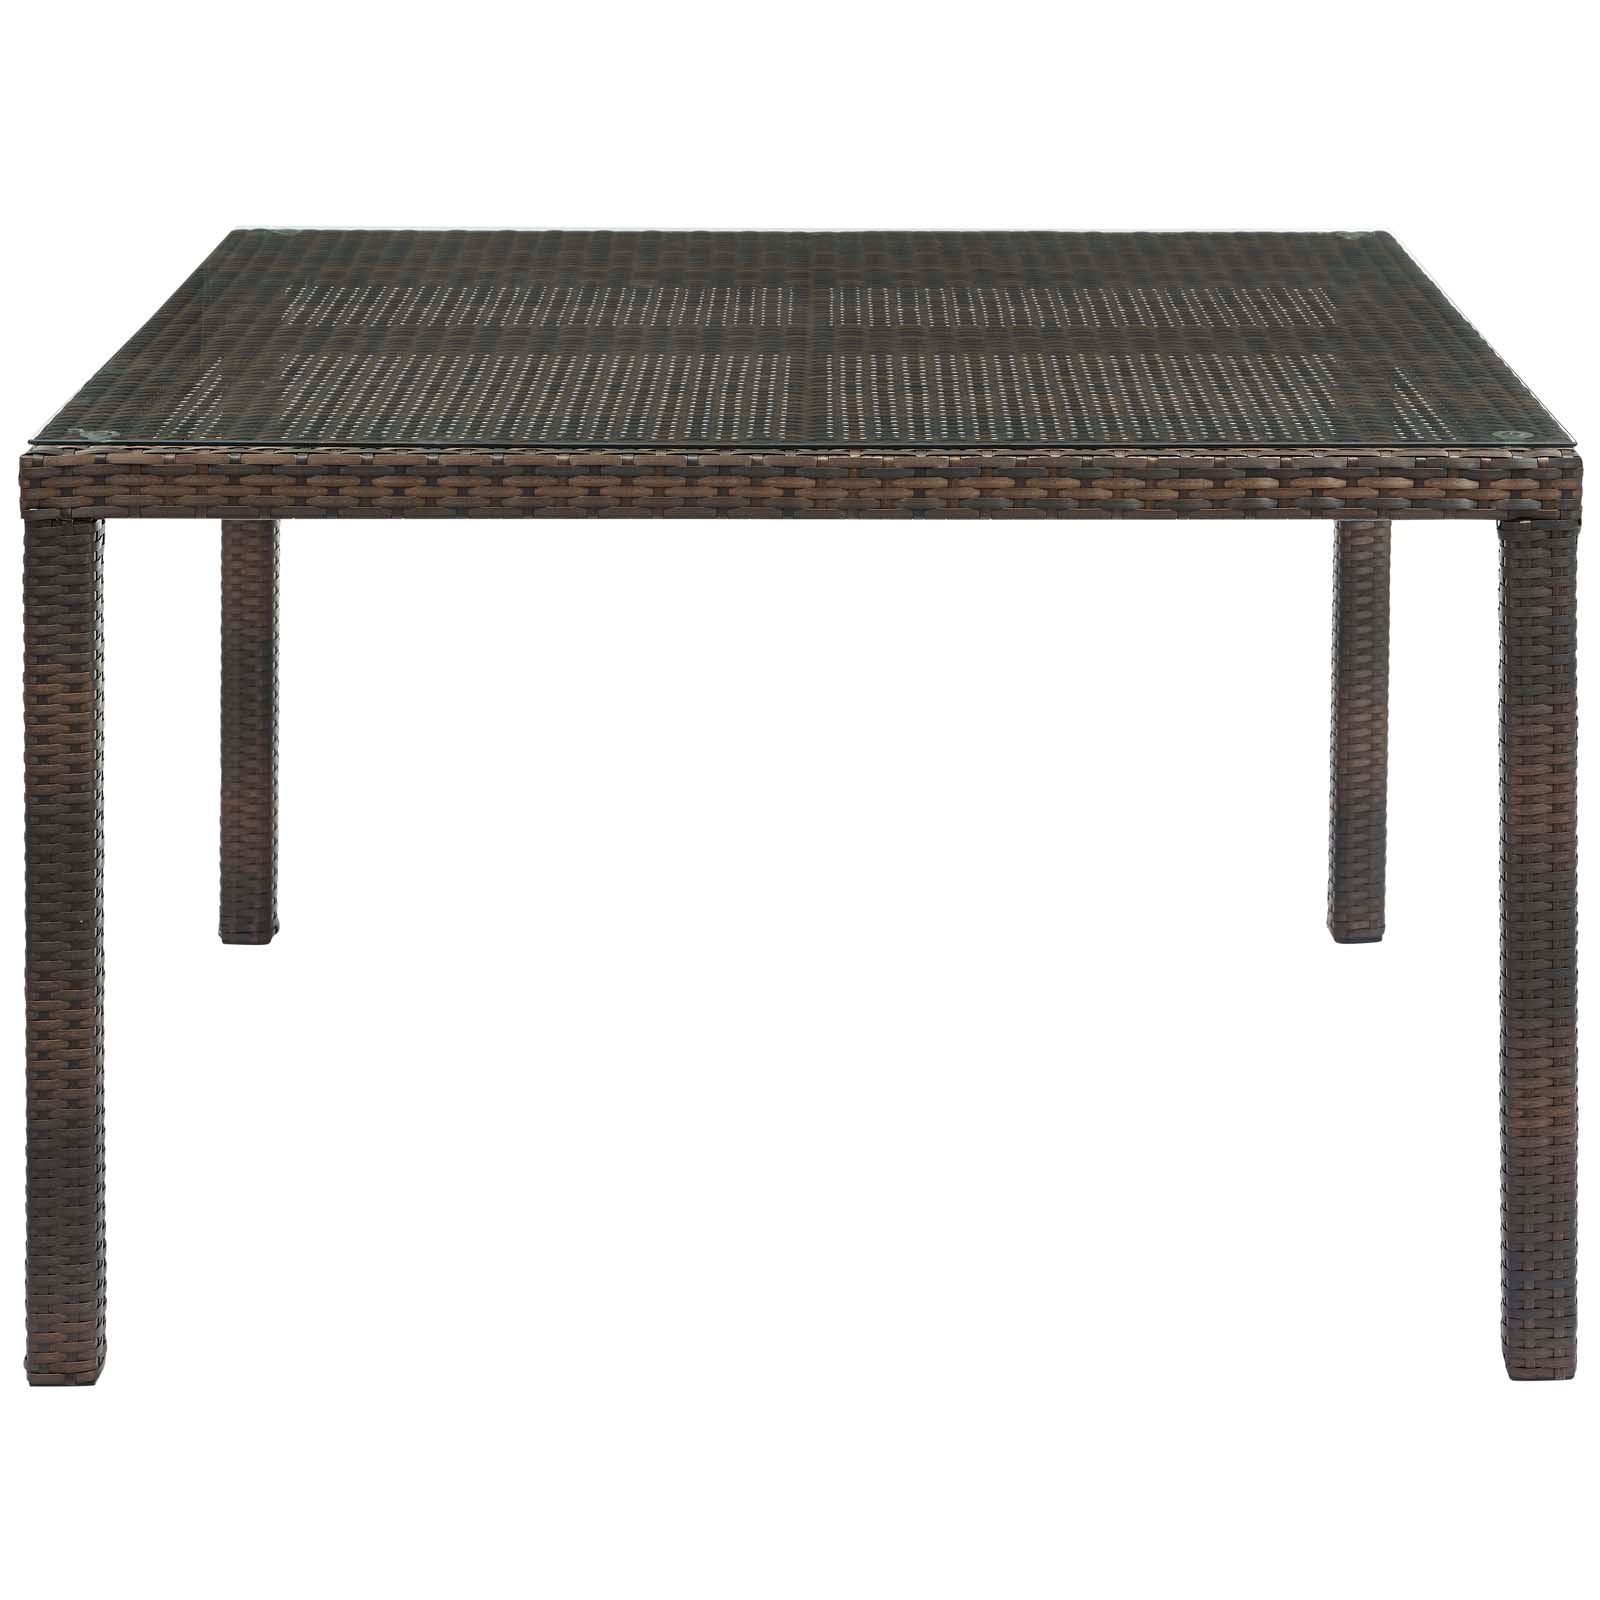 Conduit 47" Outdoor Patio Wicker Rattan Dining Table - East Shore Modern Home Furnishings